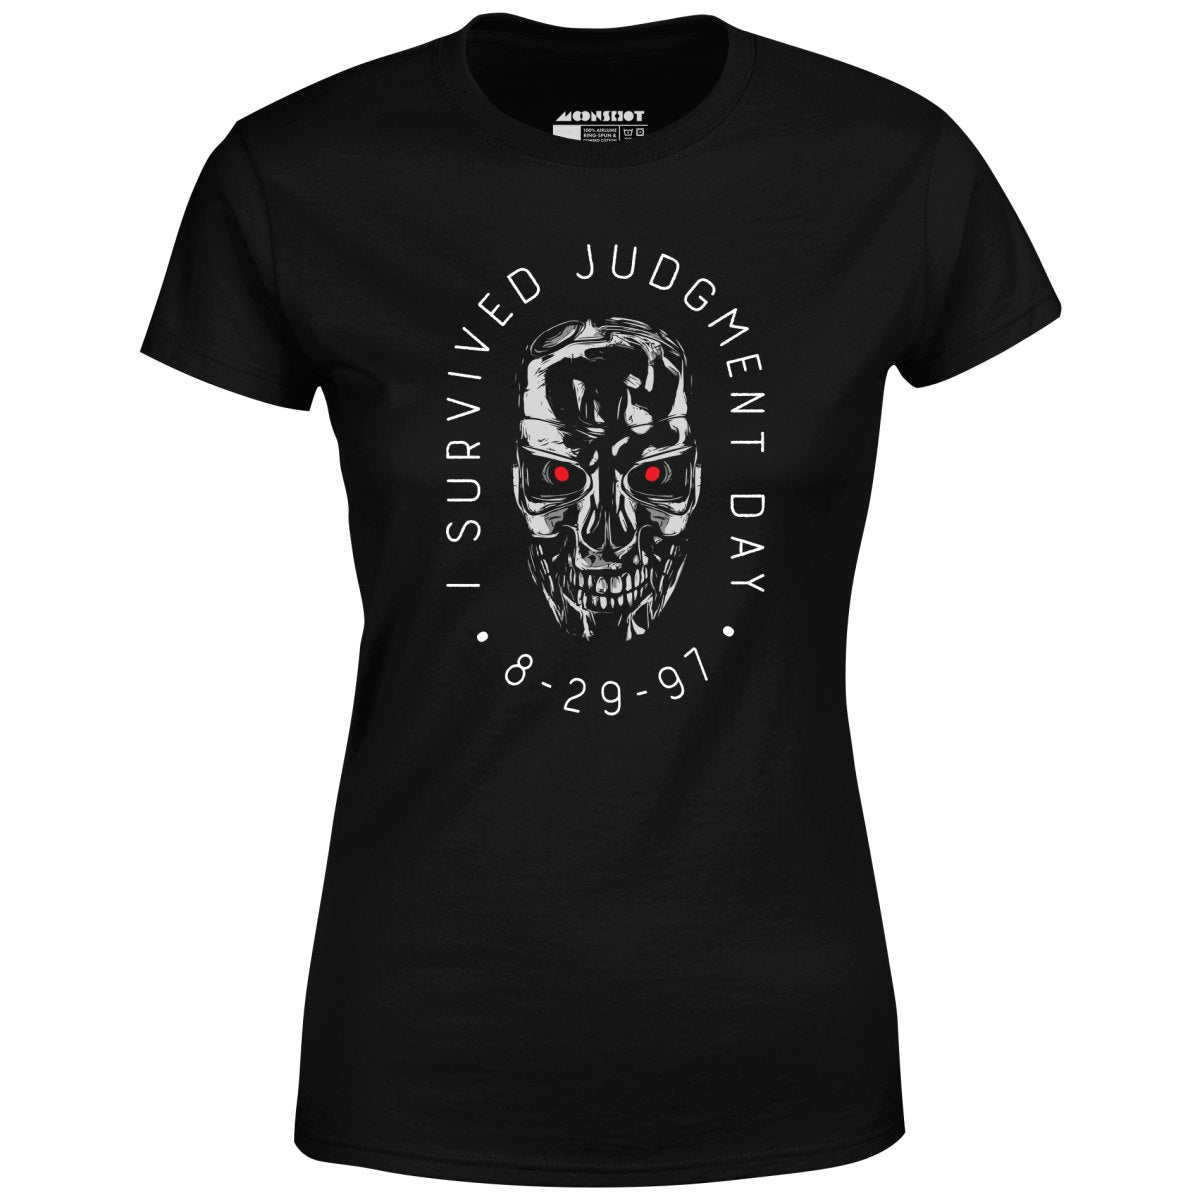 I Survived Judgment Day - Women's T-Shirt